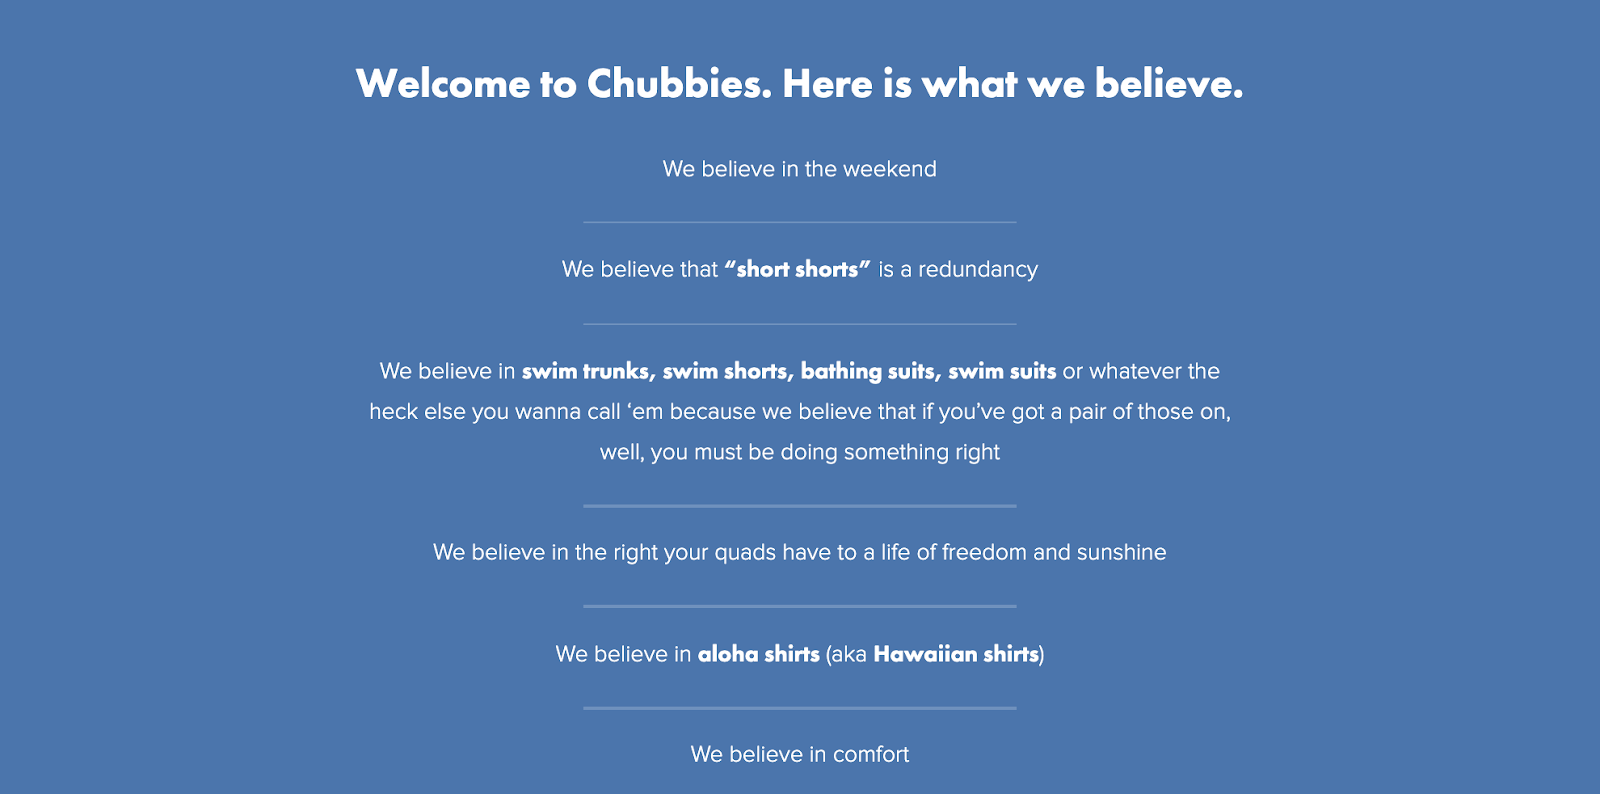 chubbies belief statement that reflects psychographic segmentation.